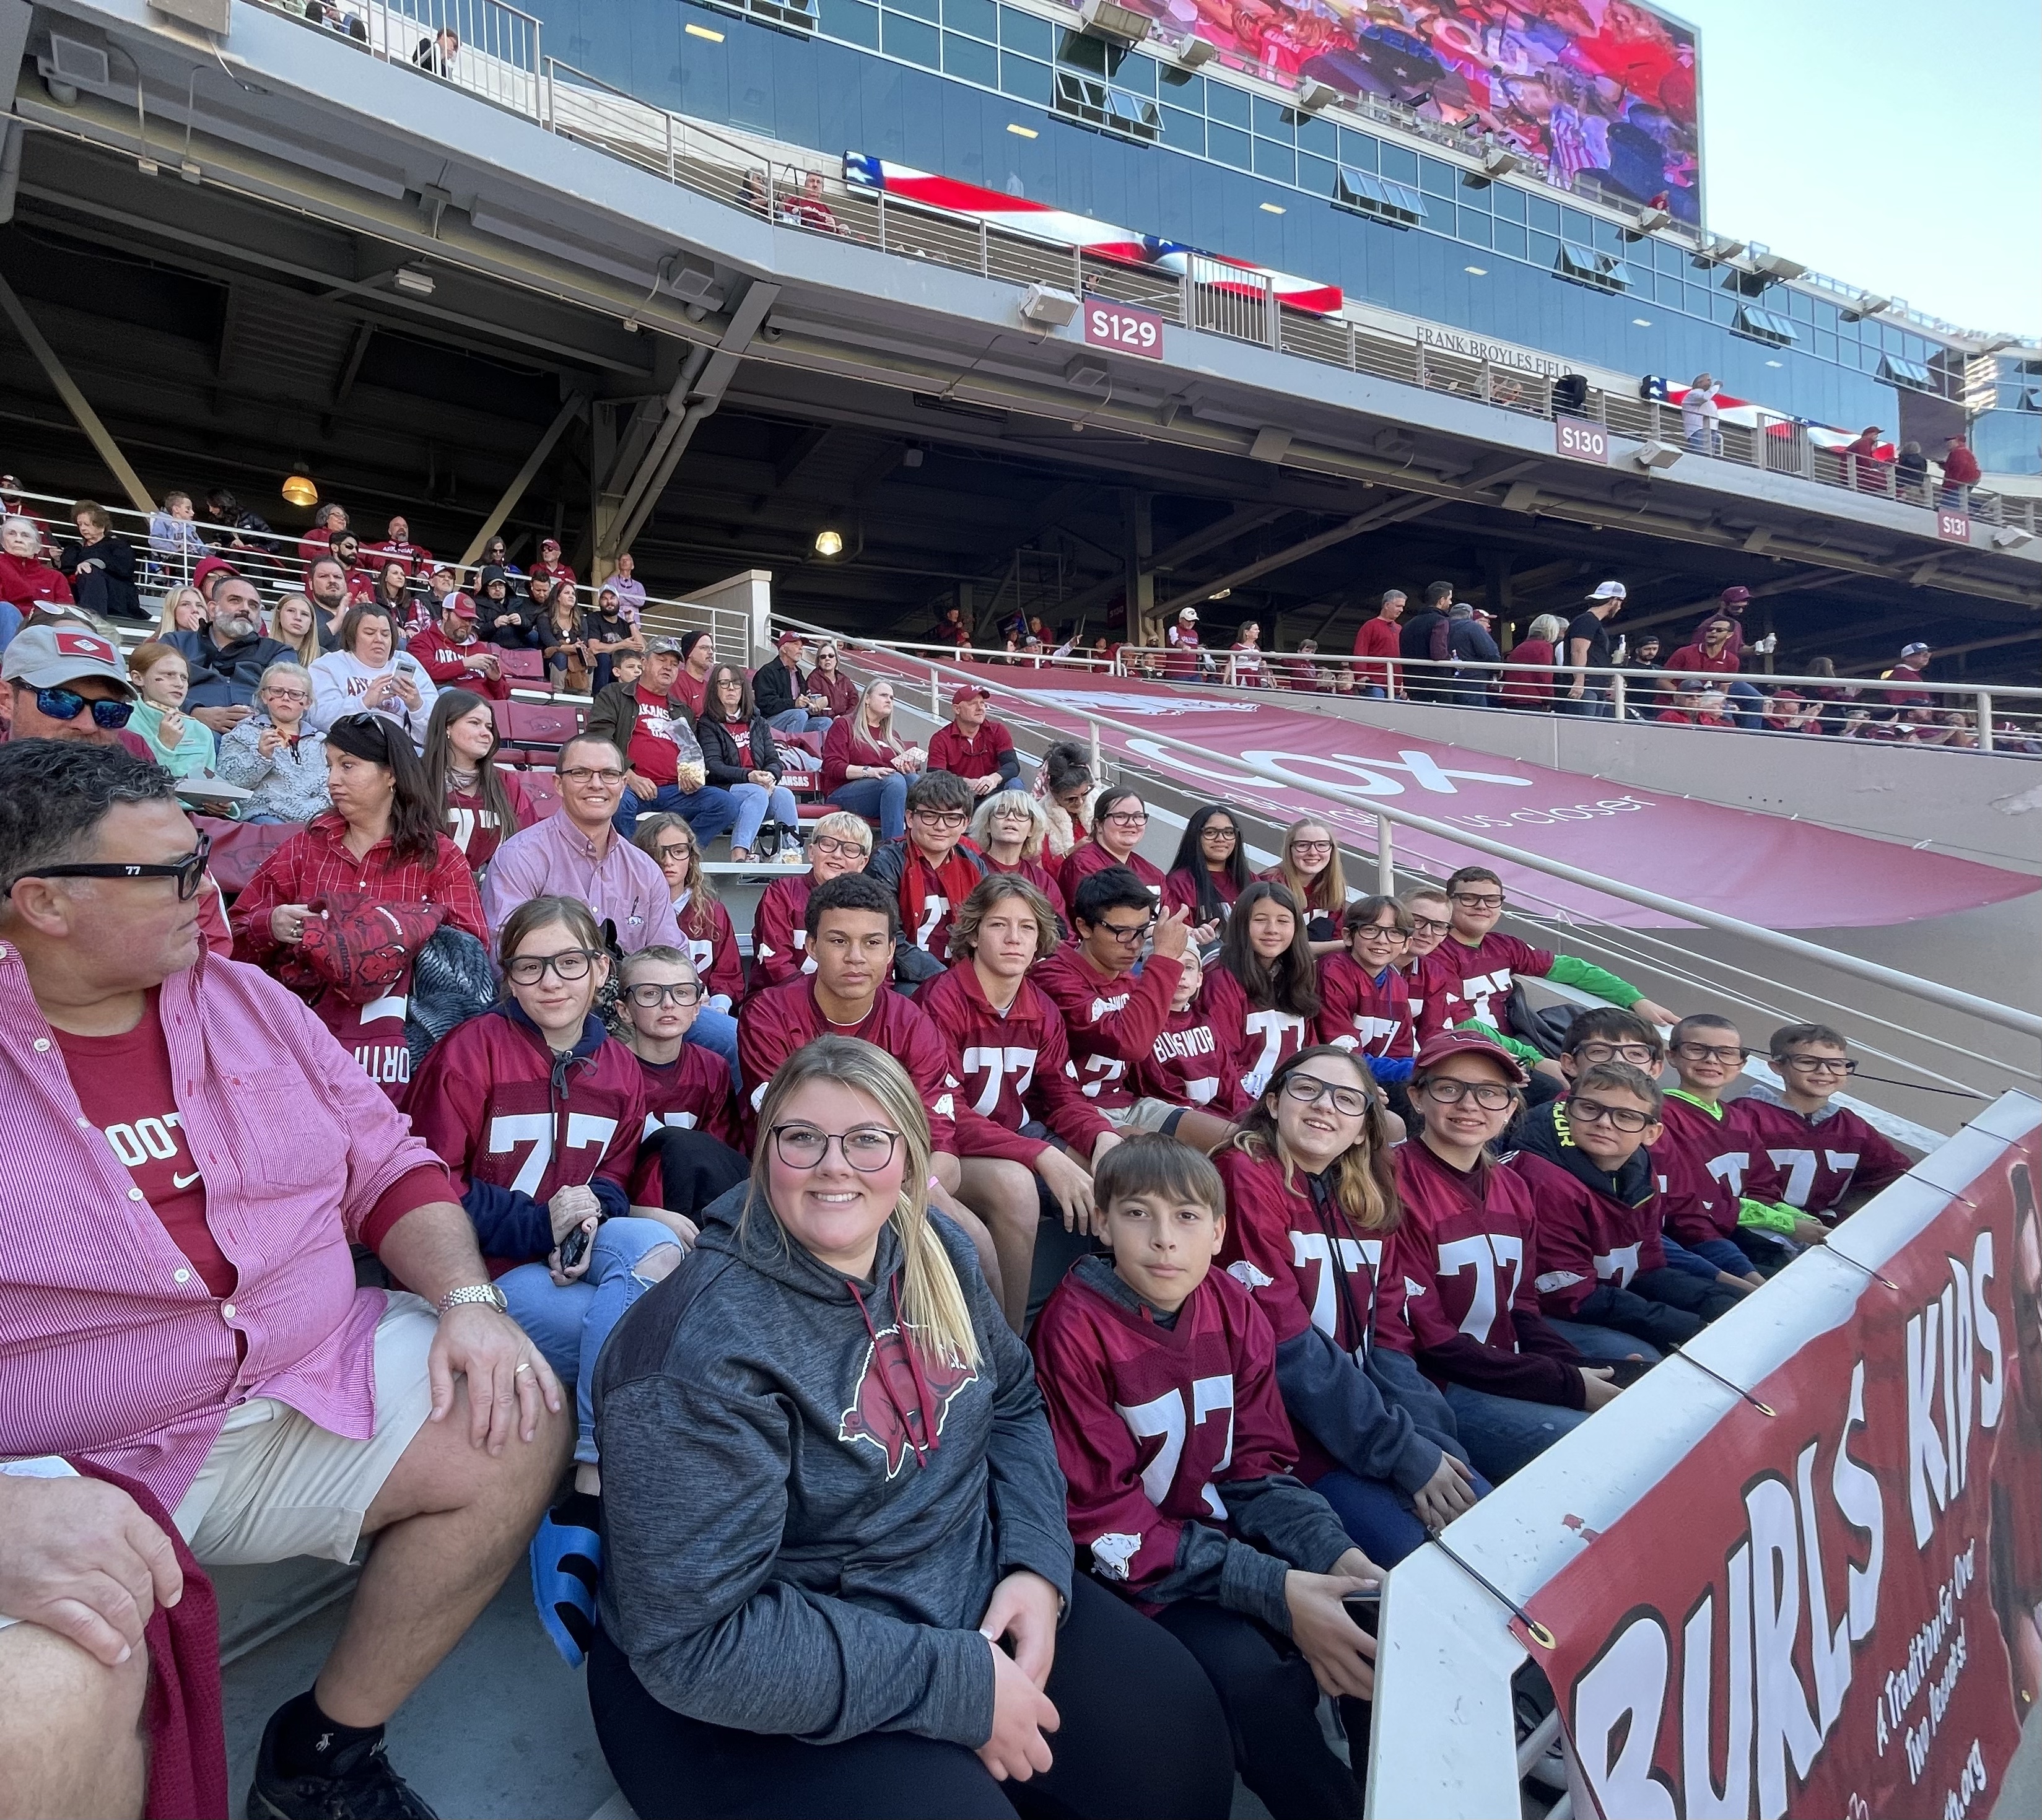 The Burls Kids represented by Baxter Regional Medical Center in attendance for the Razorback victory over Mississippi State. 